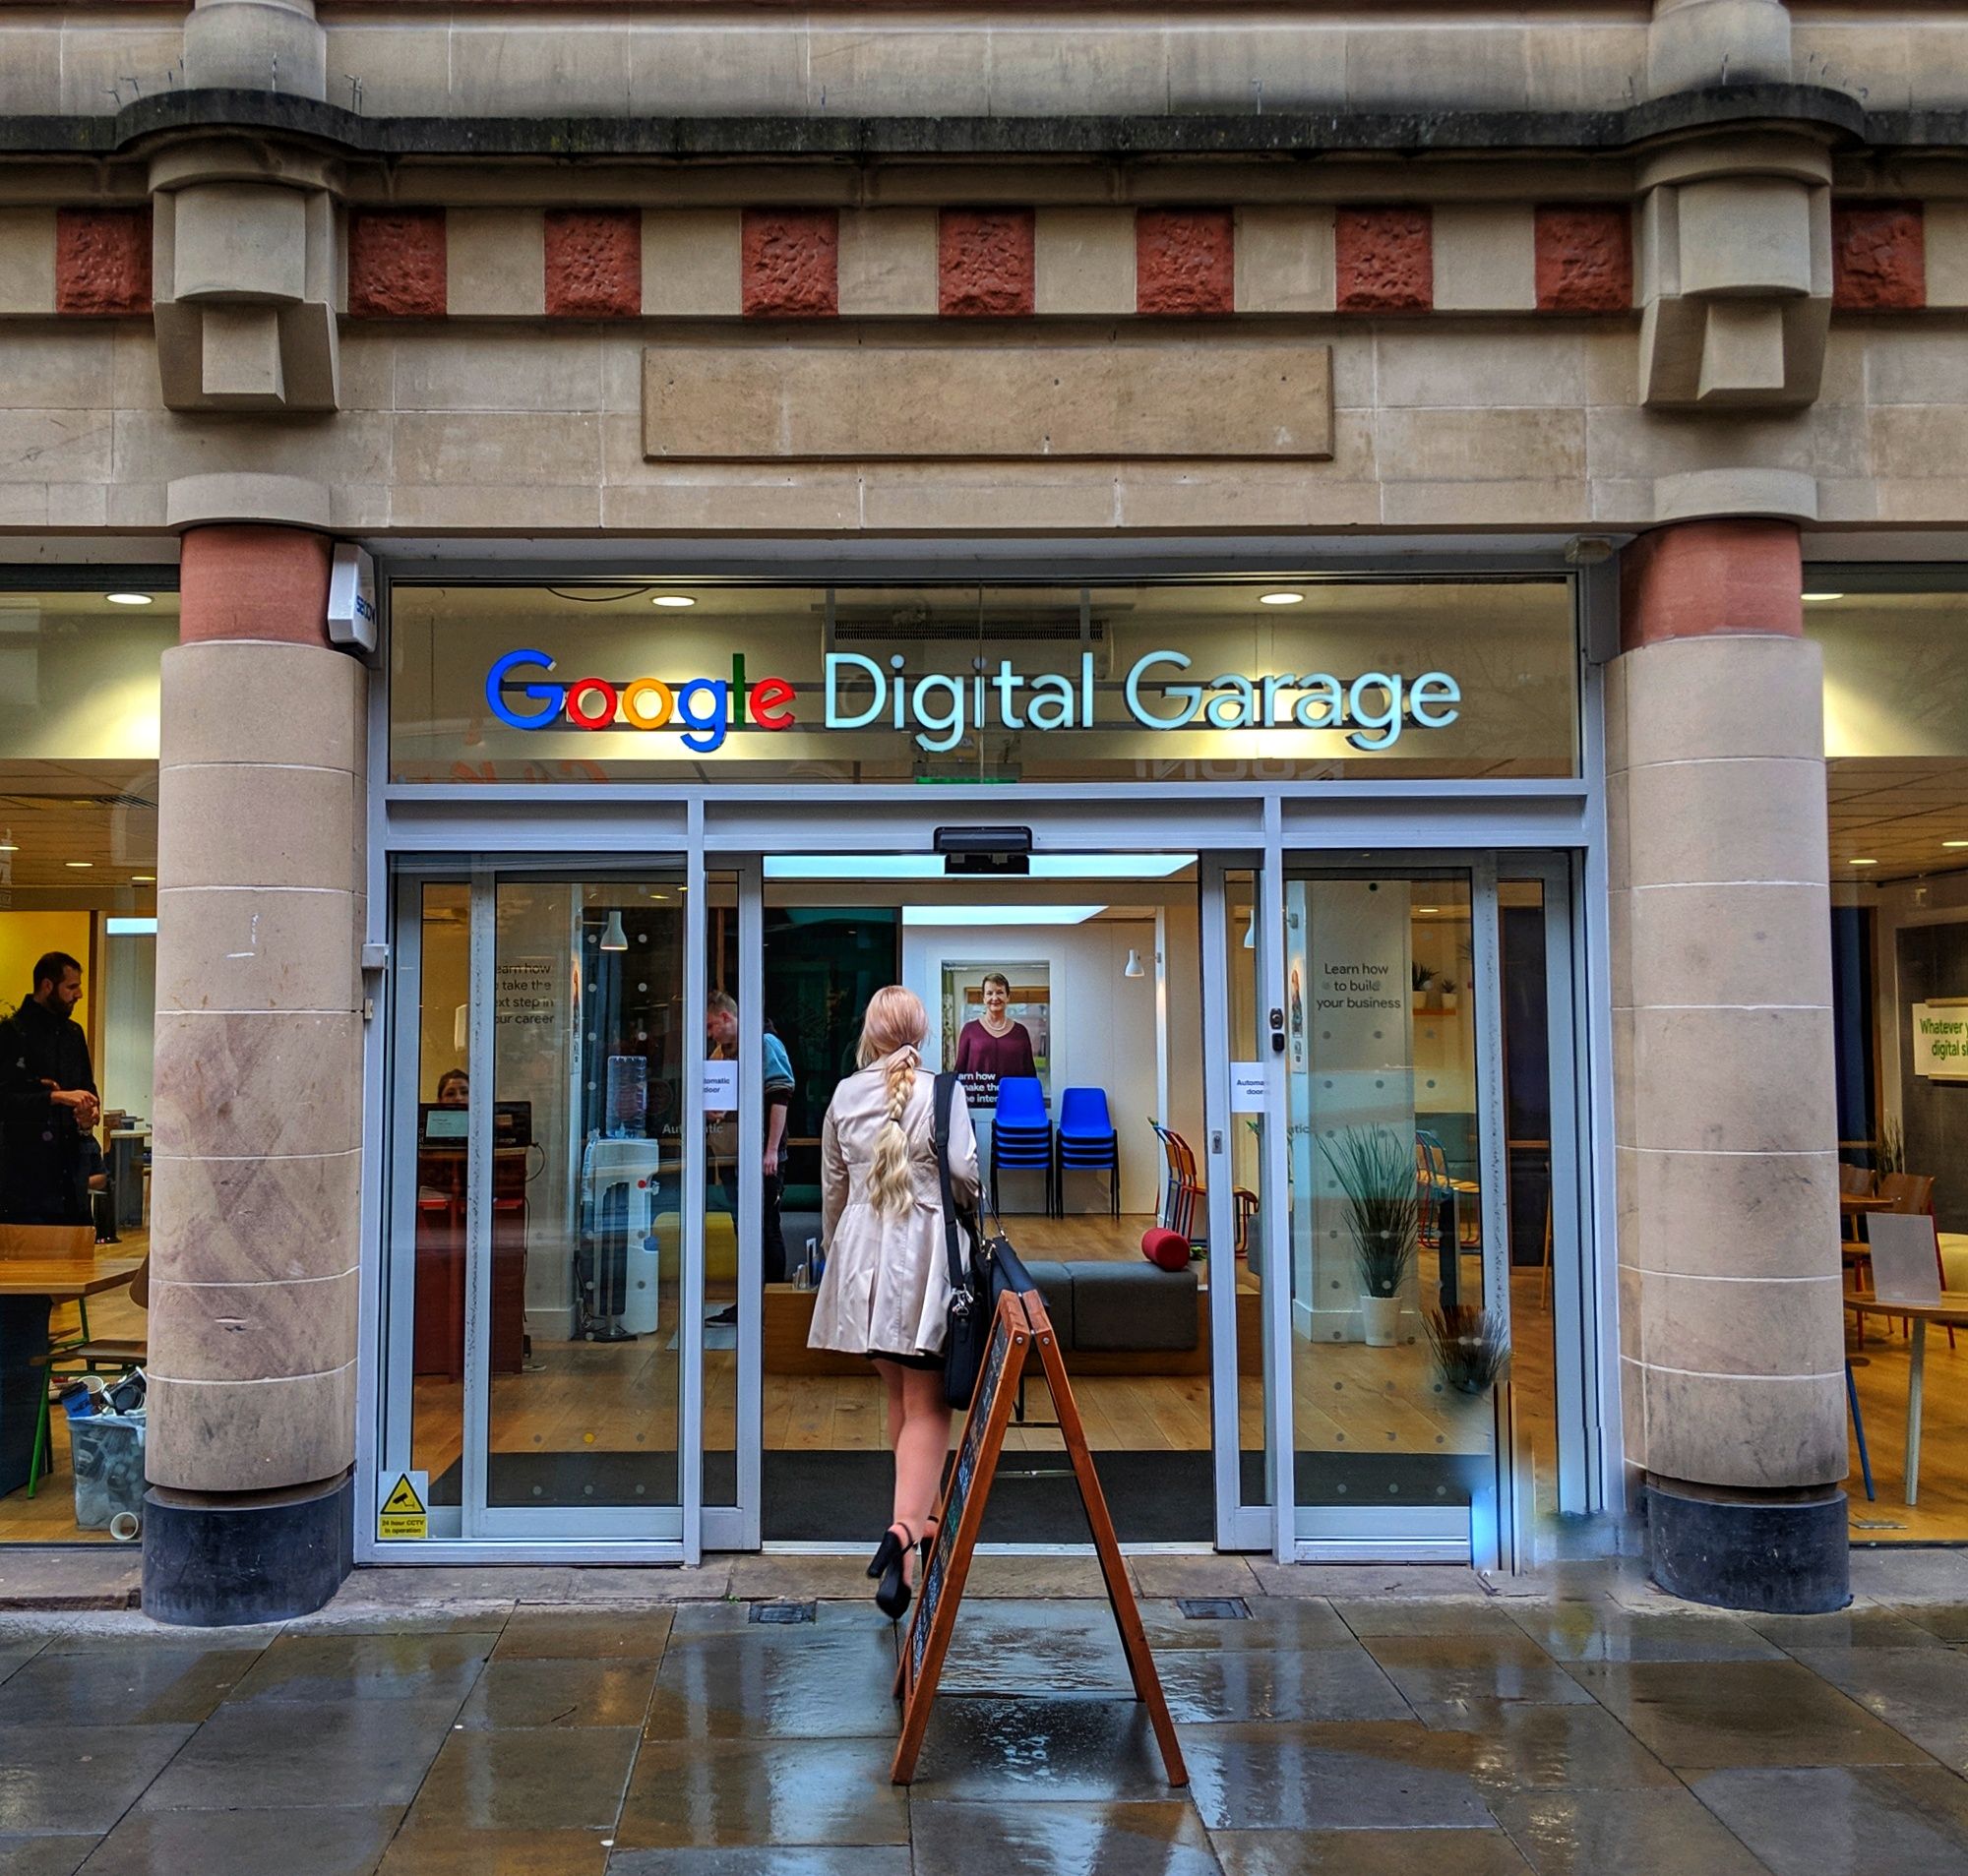 Google Garage Manchester UK. You see the person, then the shop then the building